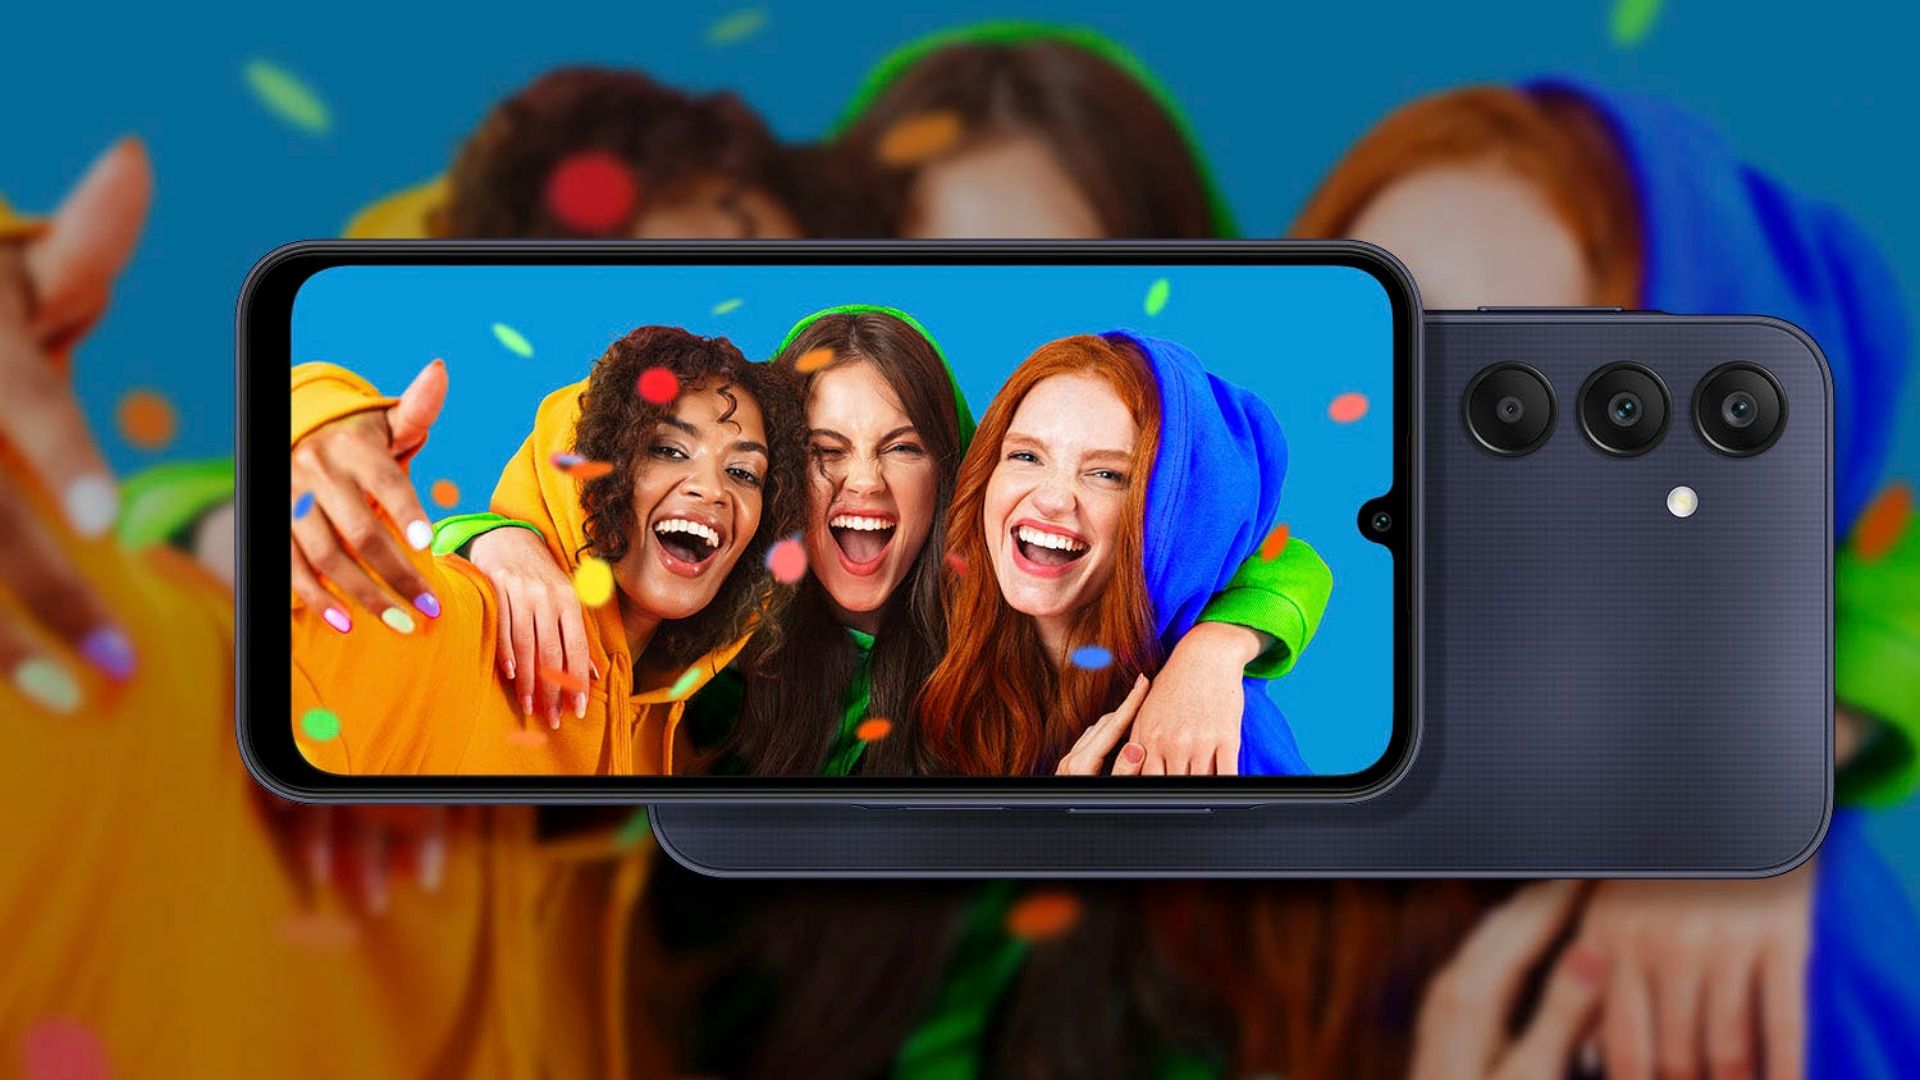 samsung galaxy a25, front and back overlayed with a group photo on the screen